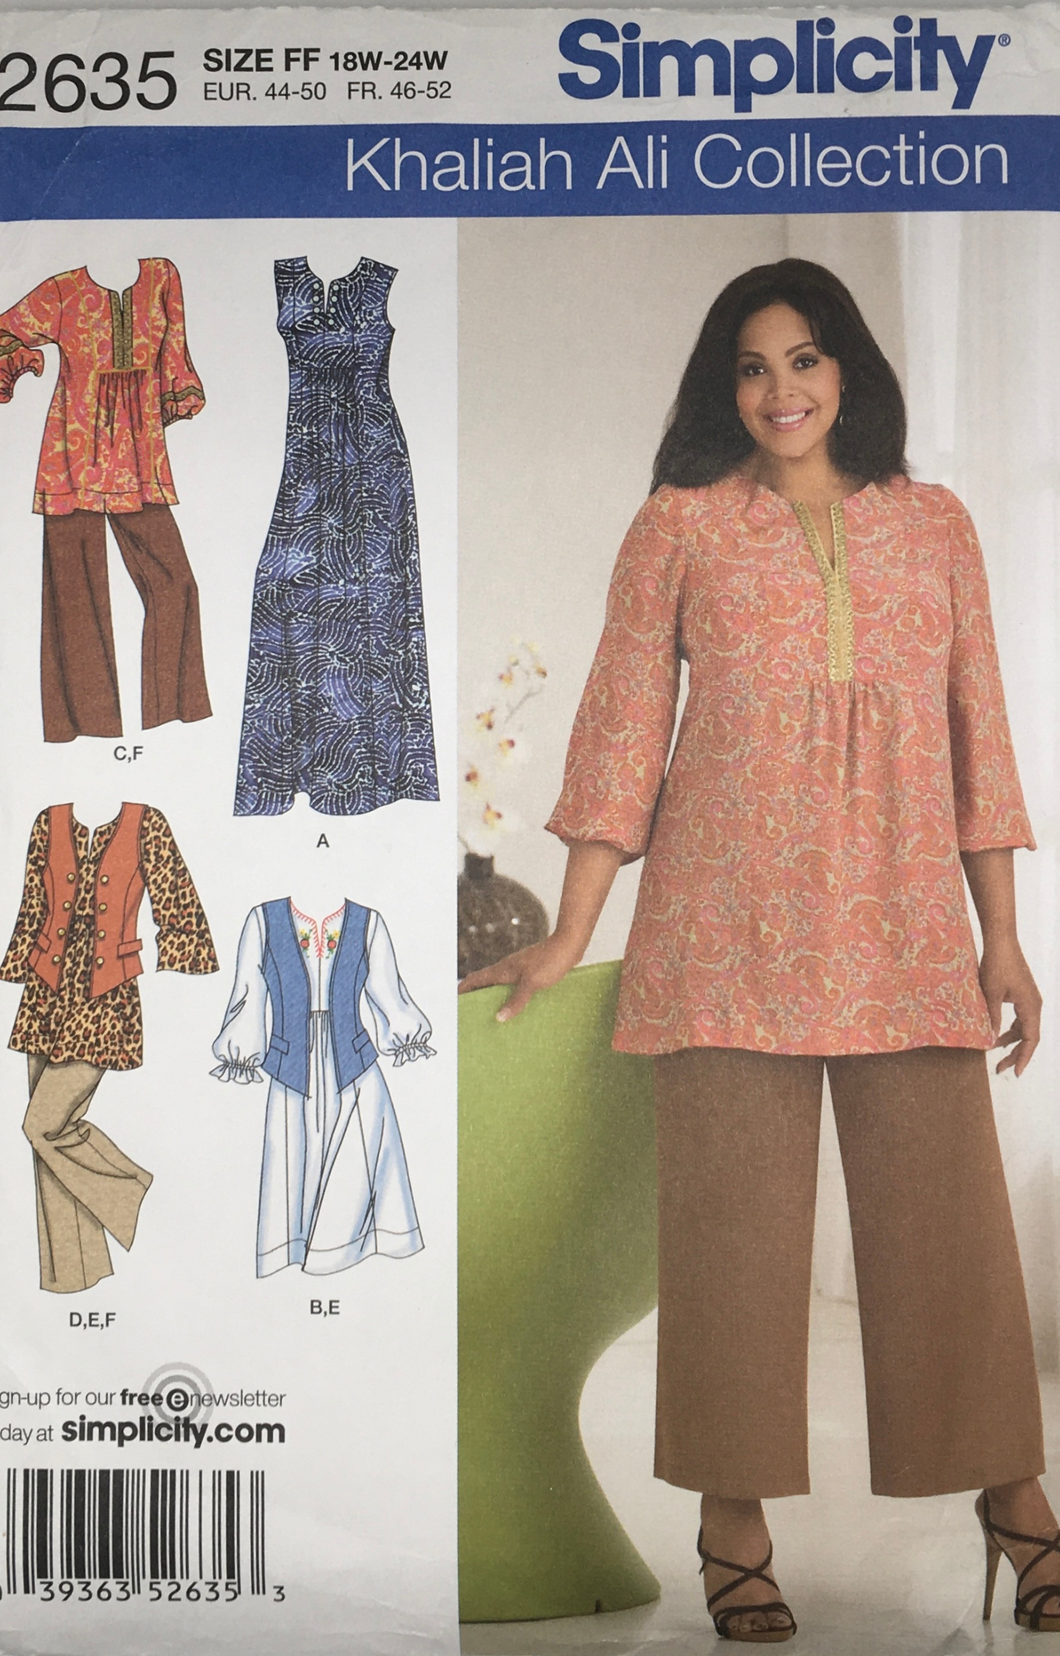 2009 Sewing Pattern: Simplicity 2635